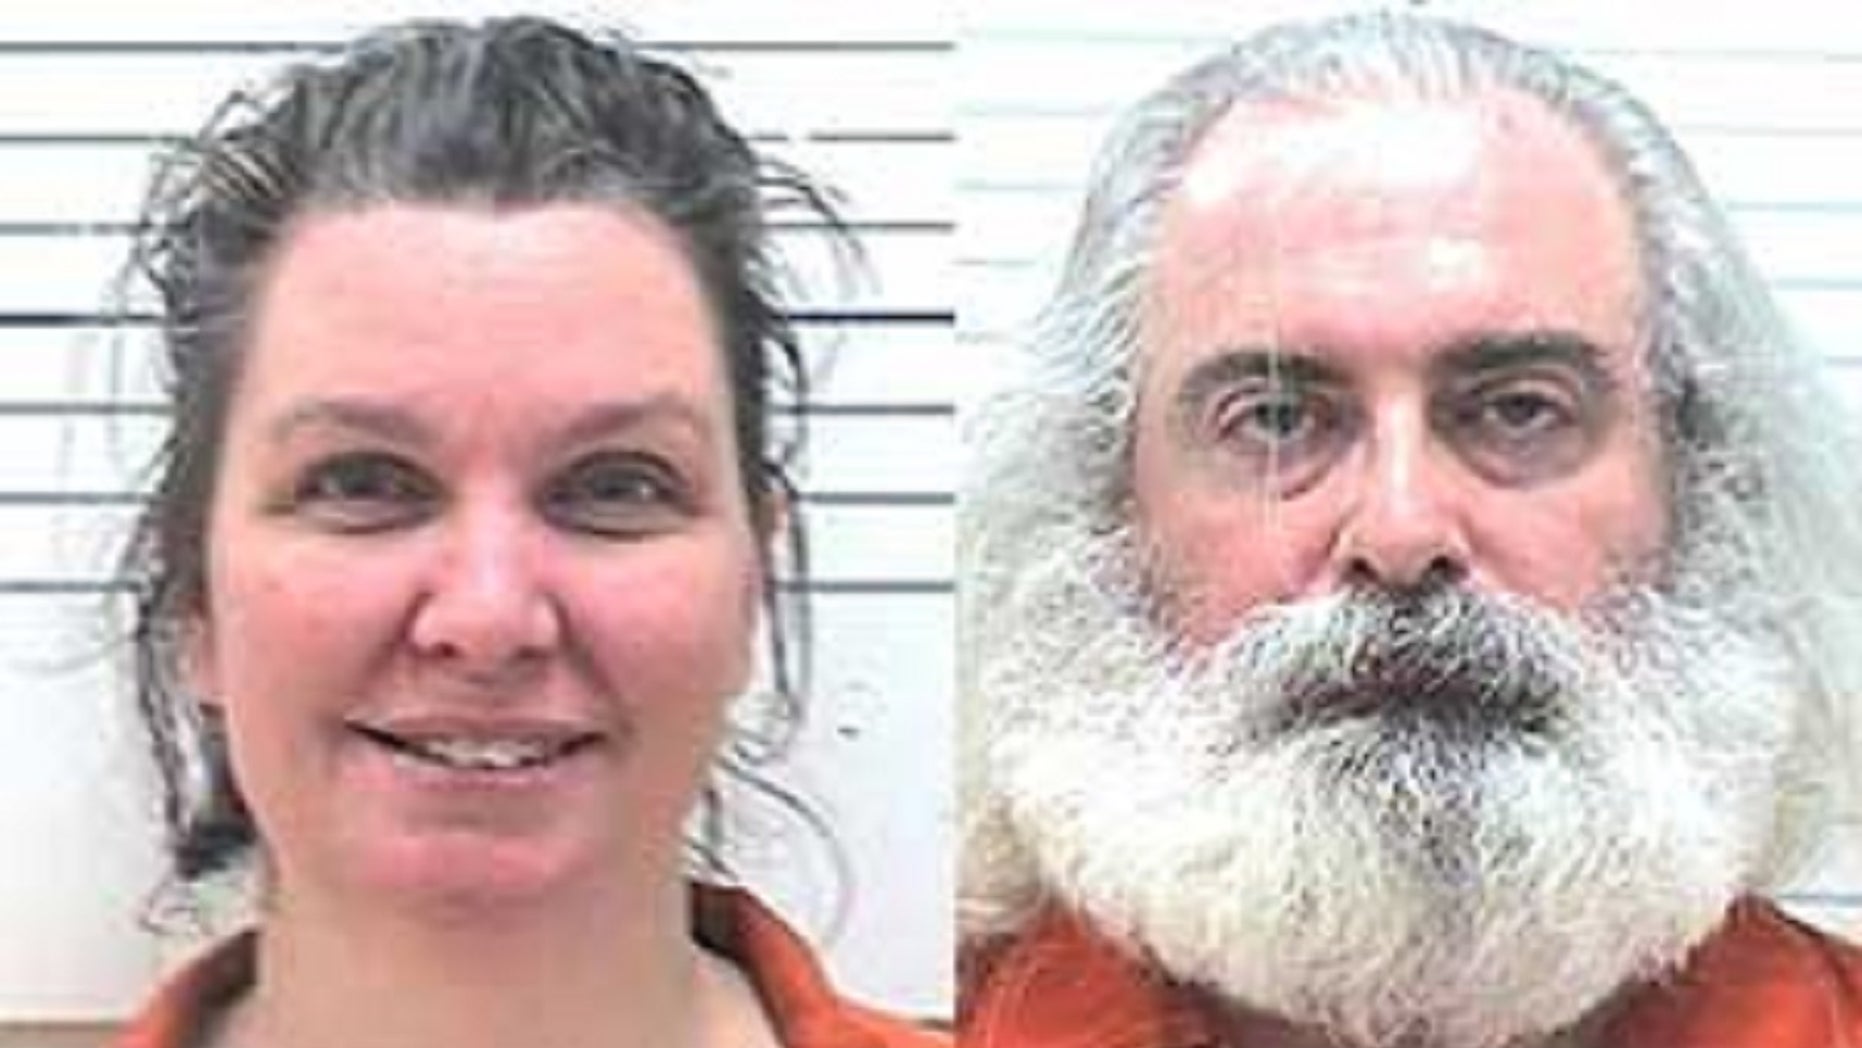 Oklahoma couple charged after daughter, 3, died with 17-pound tumor: prosecutors